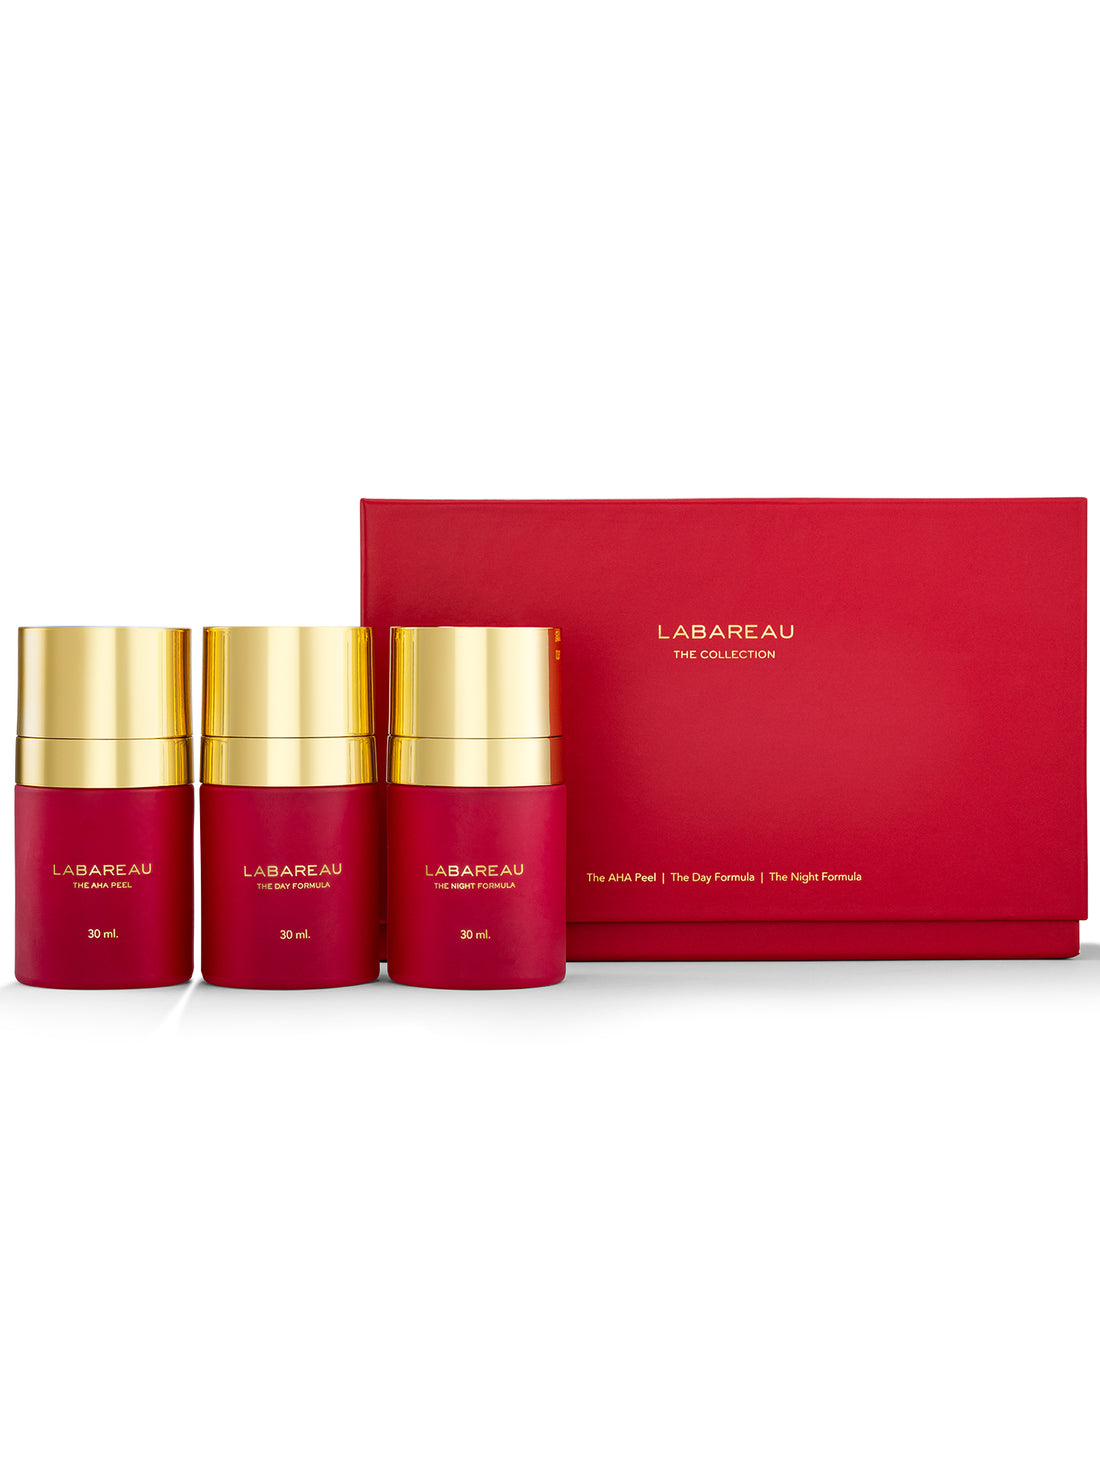 LABAREAU - Products - The Collection 002